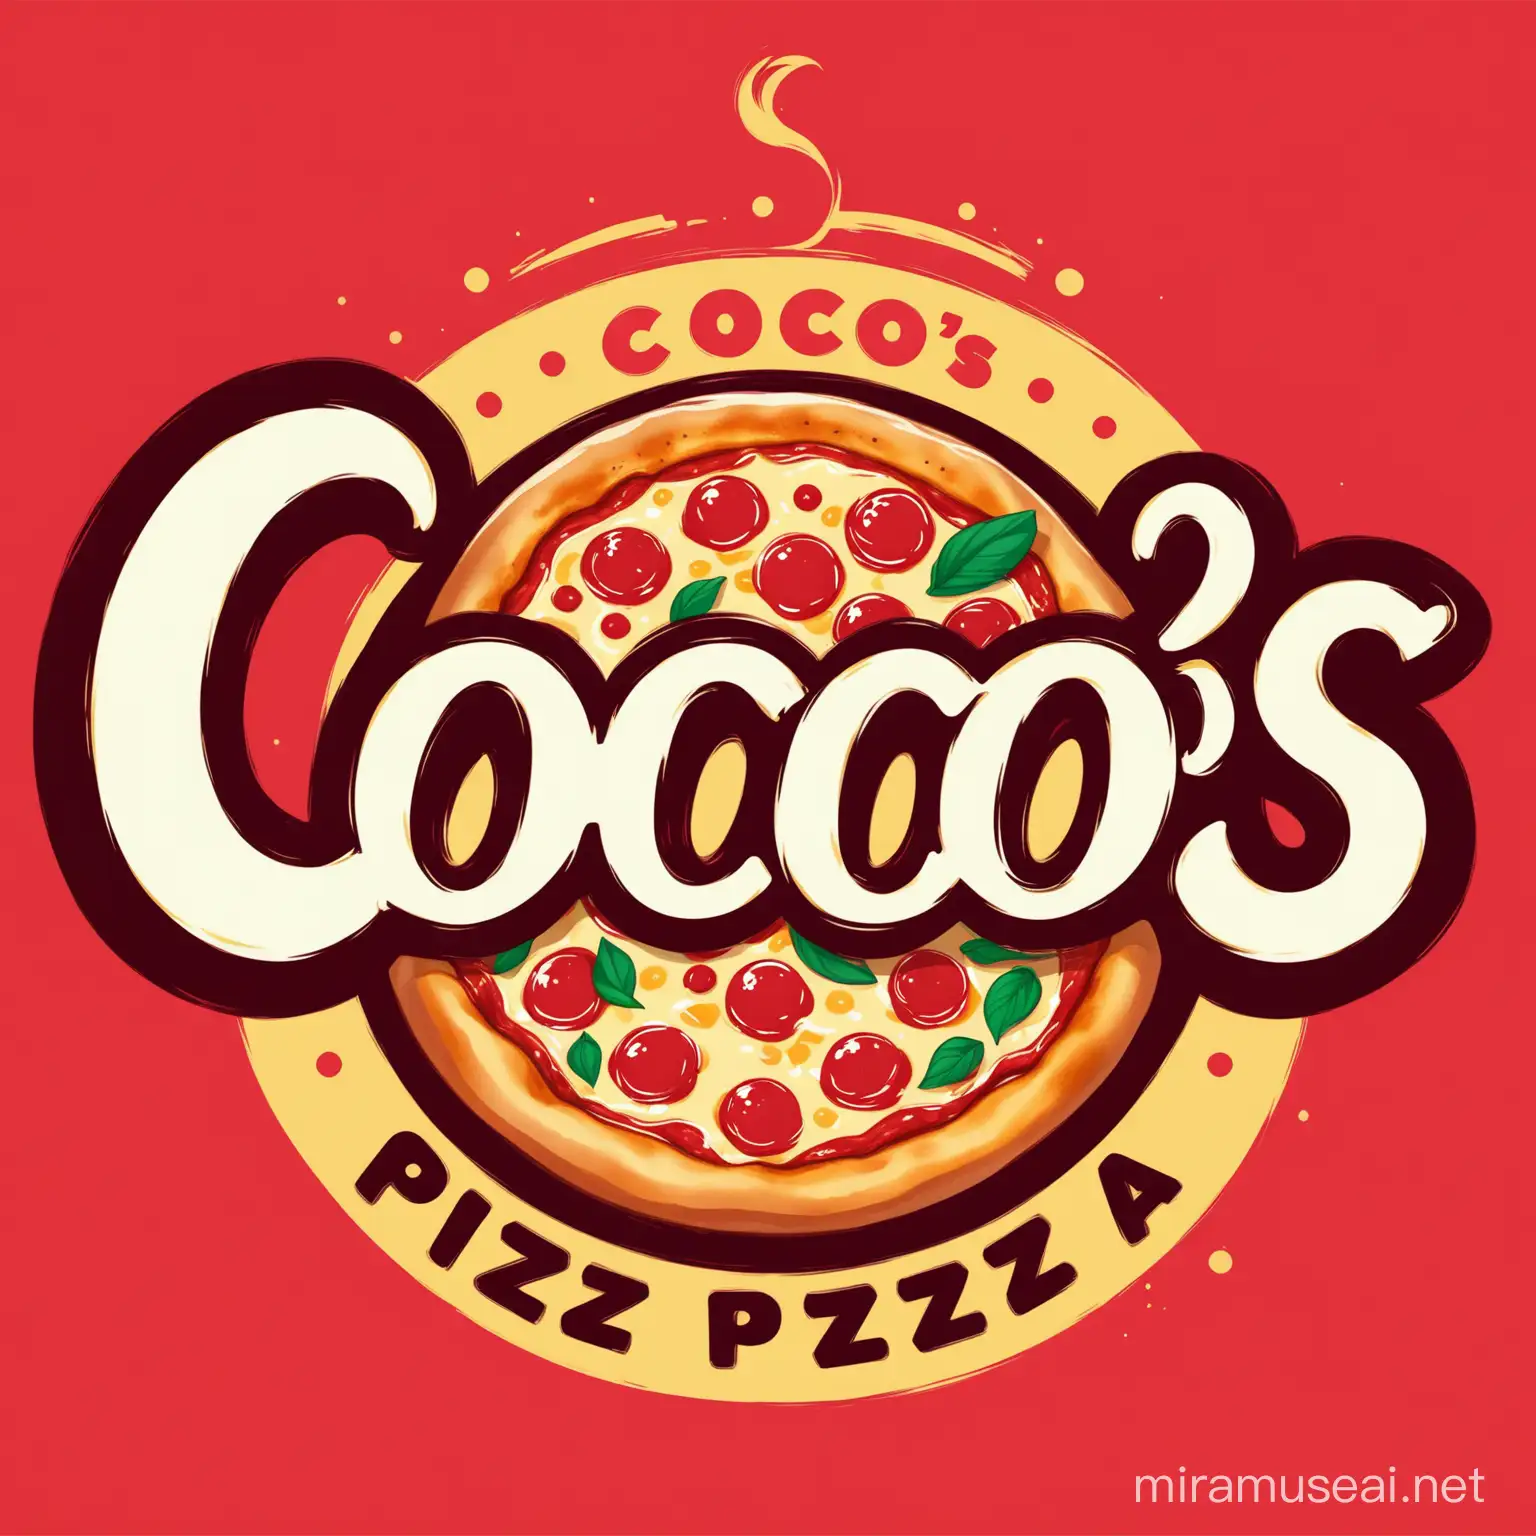 Brand logo for "coco's pizza"